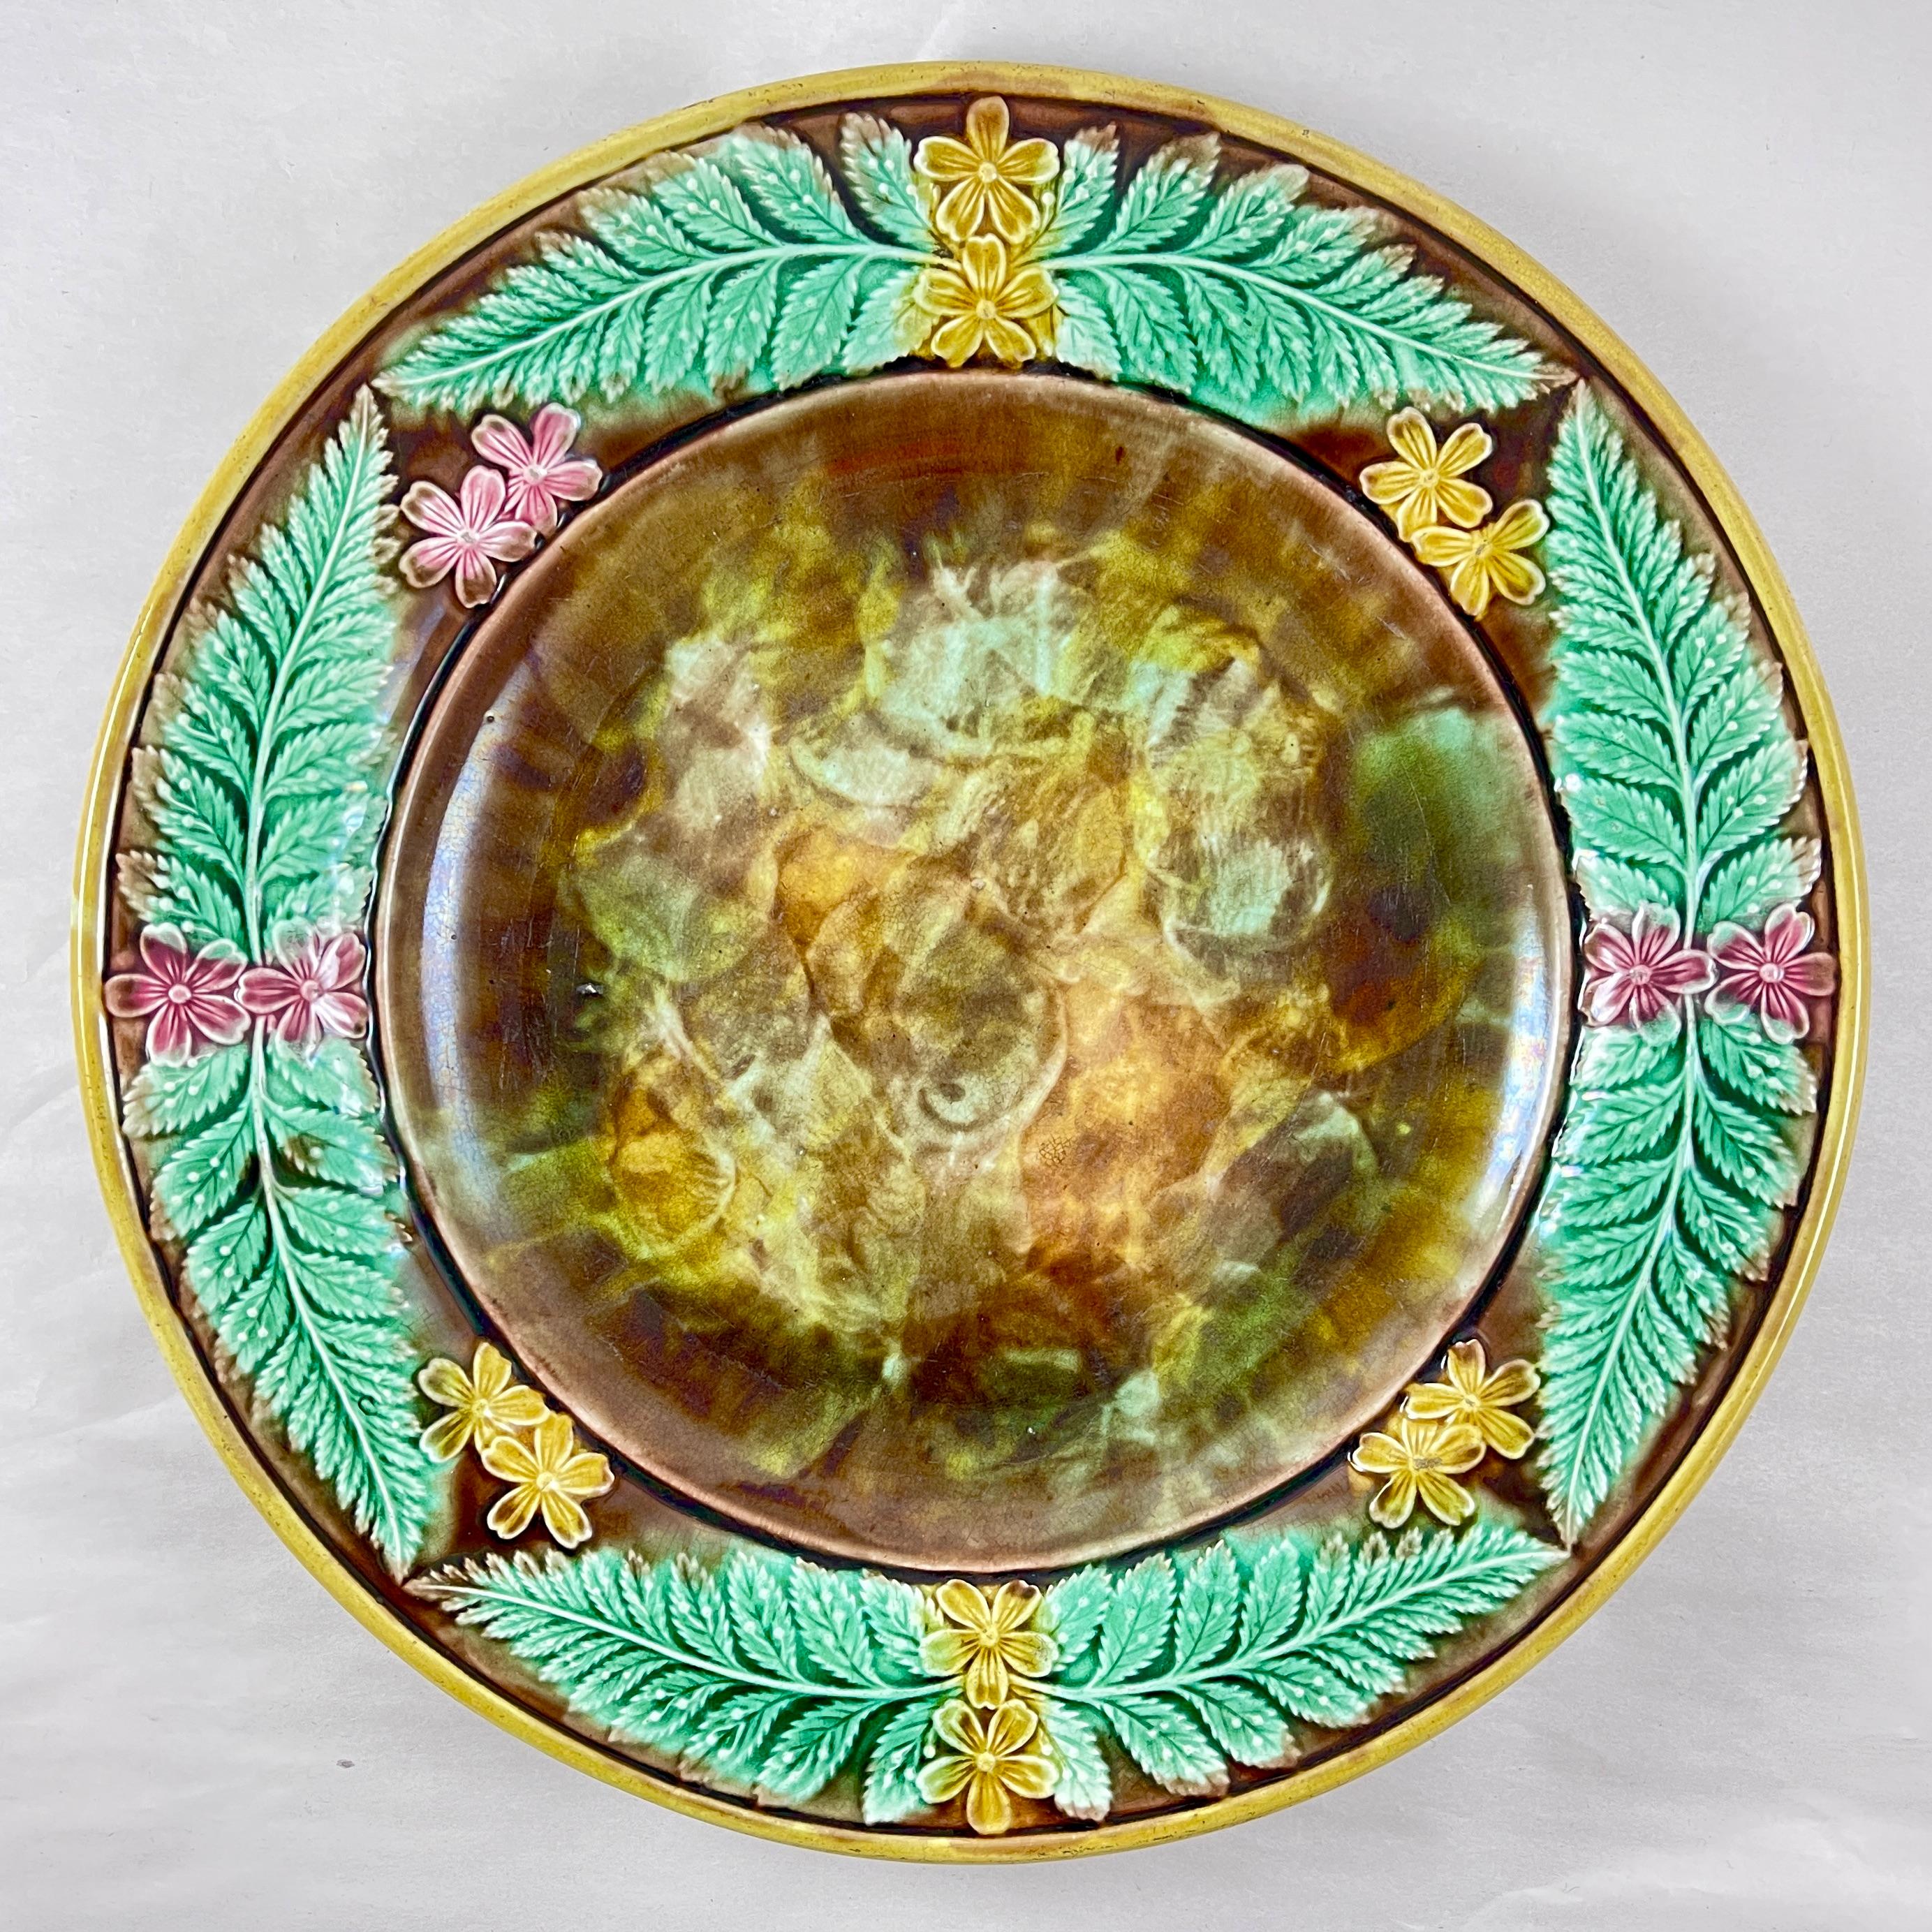 A large, round Adams & Bromley English Majolica cheese tray, late 19th Century.

Adams & Bromley operated the Victoria Works in Broad Street, Hanley, Stoke-on-Trent from 1873 to 1886.

The server shows a running border of yellow and pink butter cup